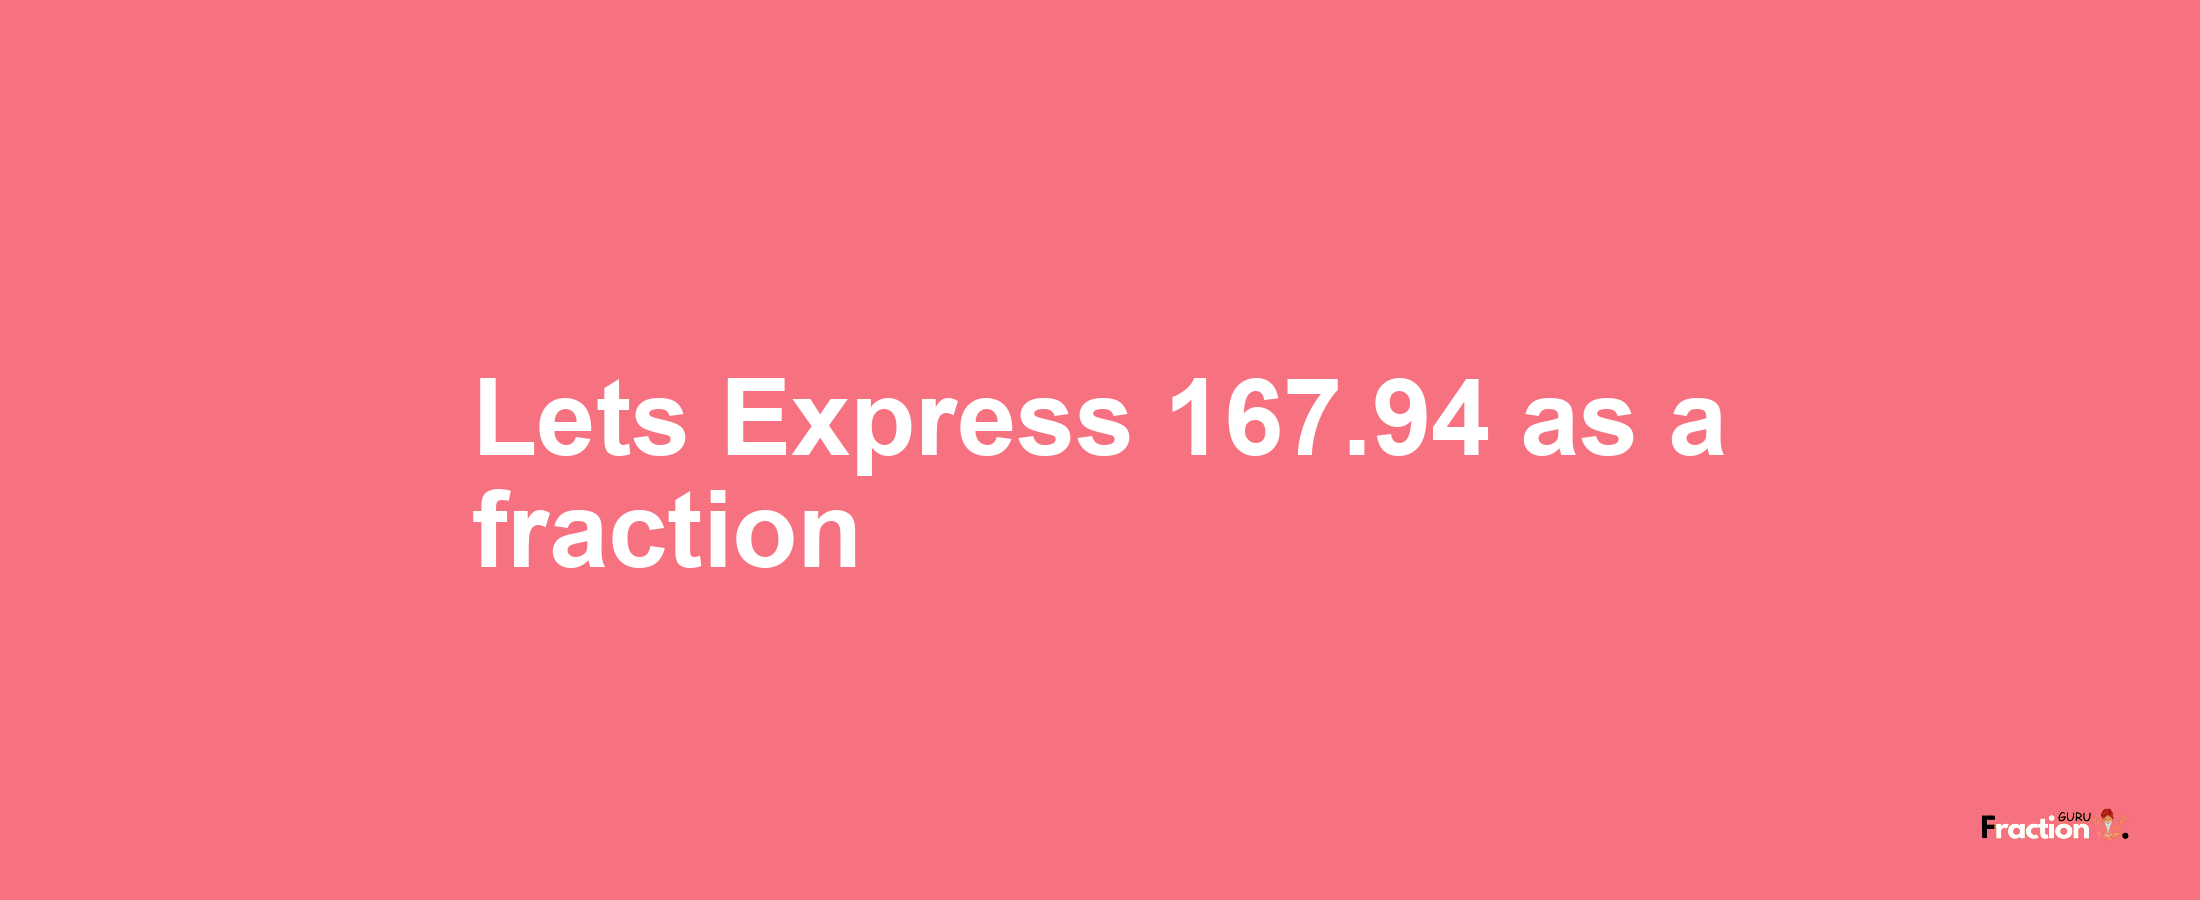 Lets Express 167.94 as afraction